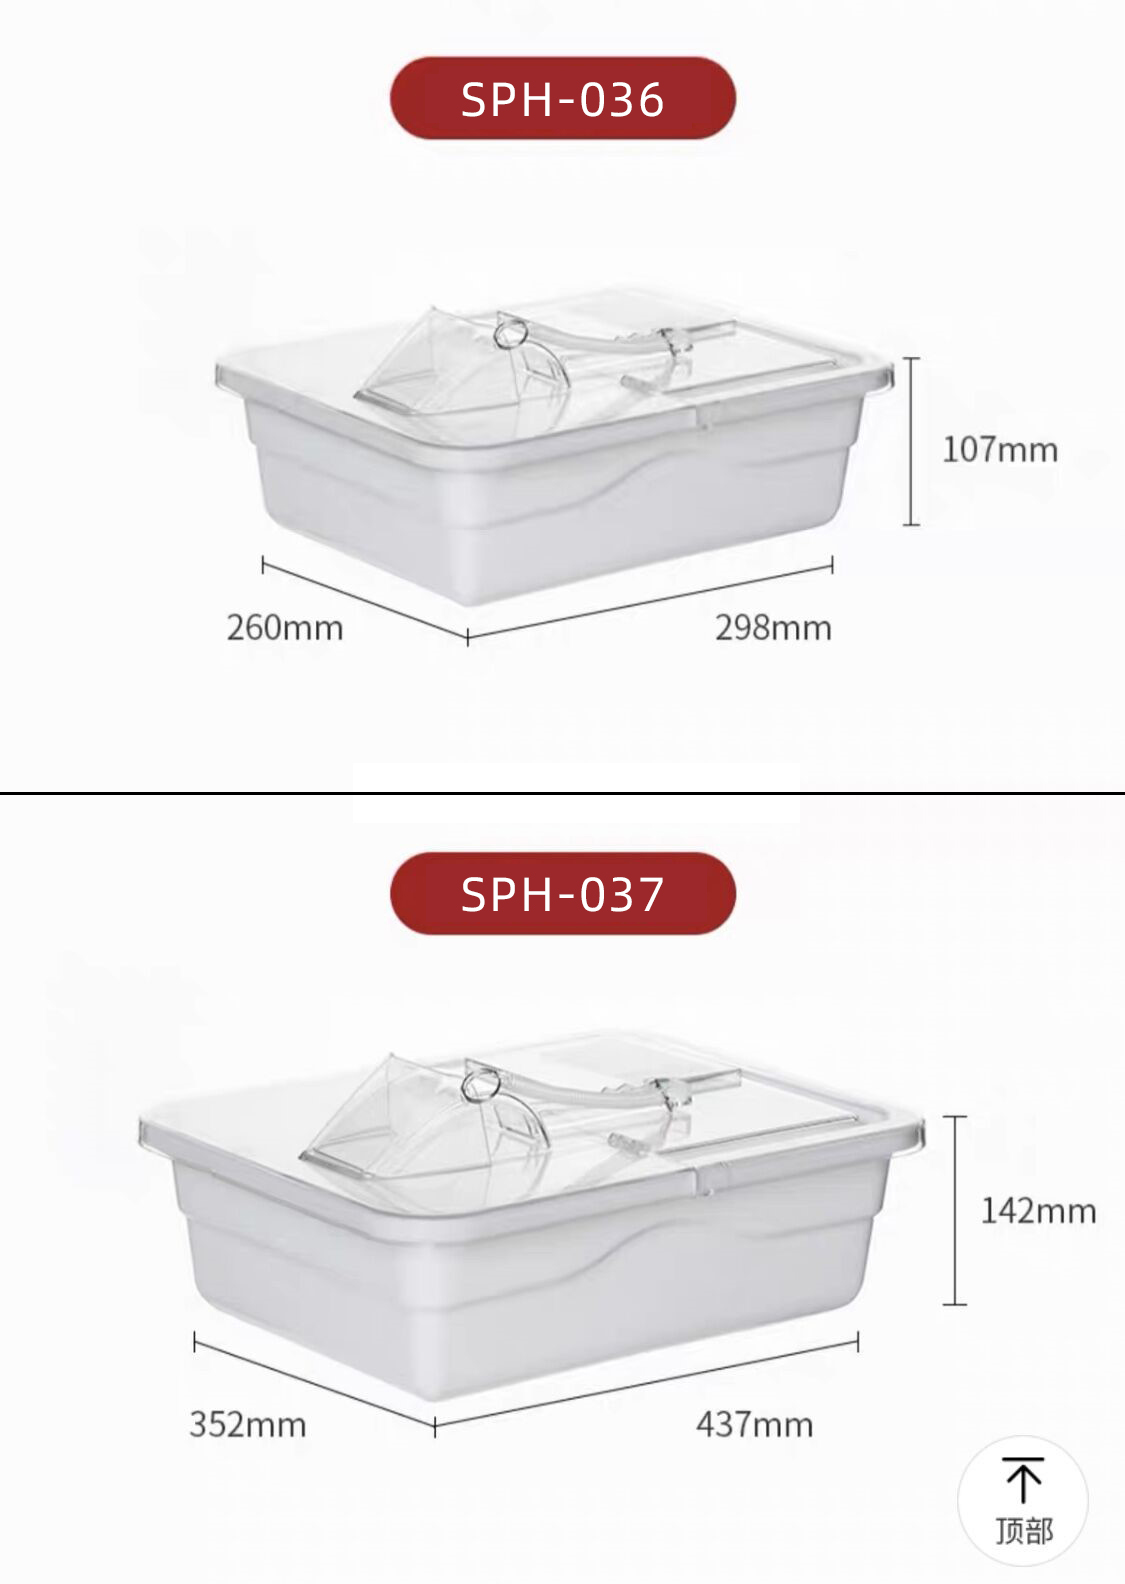 SPH-036 10L Scoop bin Ecobox hot selling in Australia white bulk candy sweet nuts food bin container